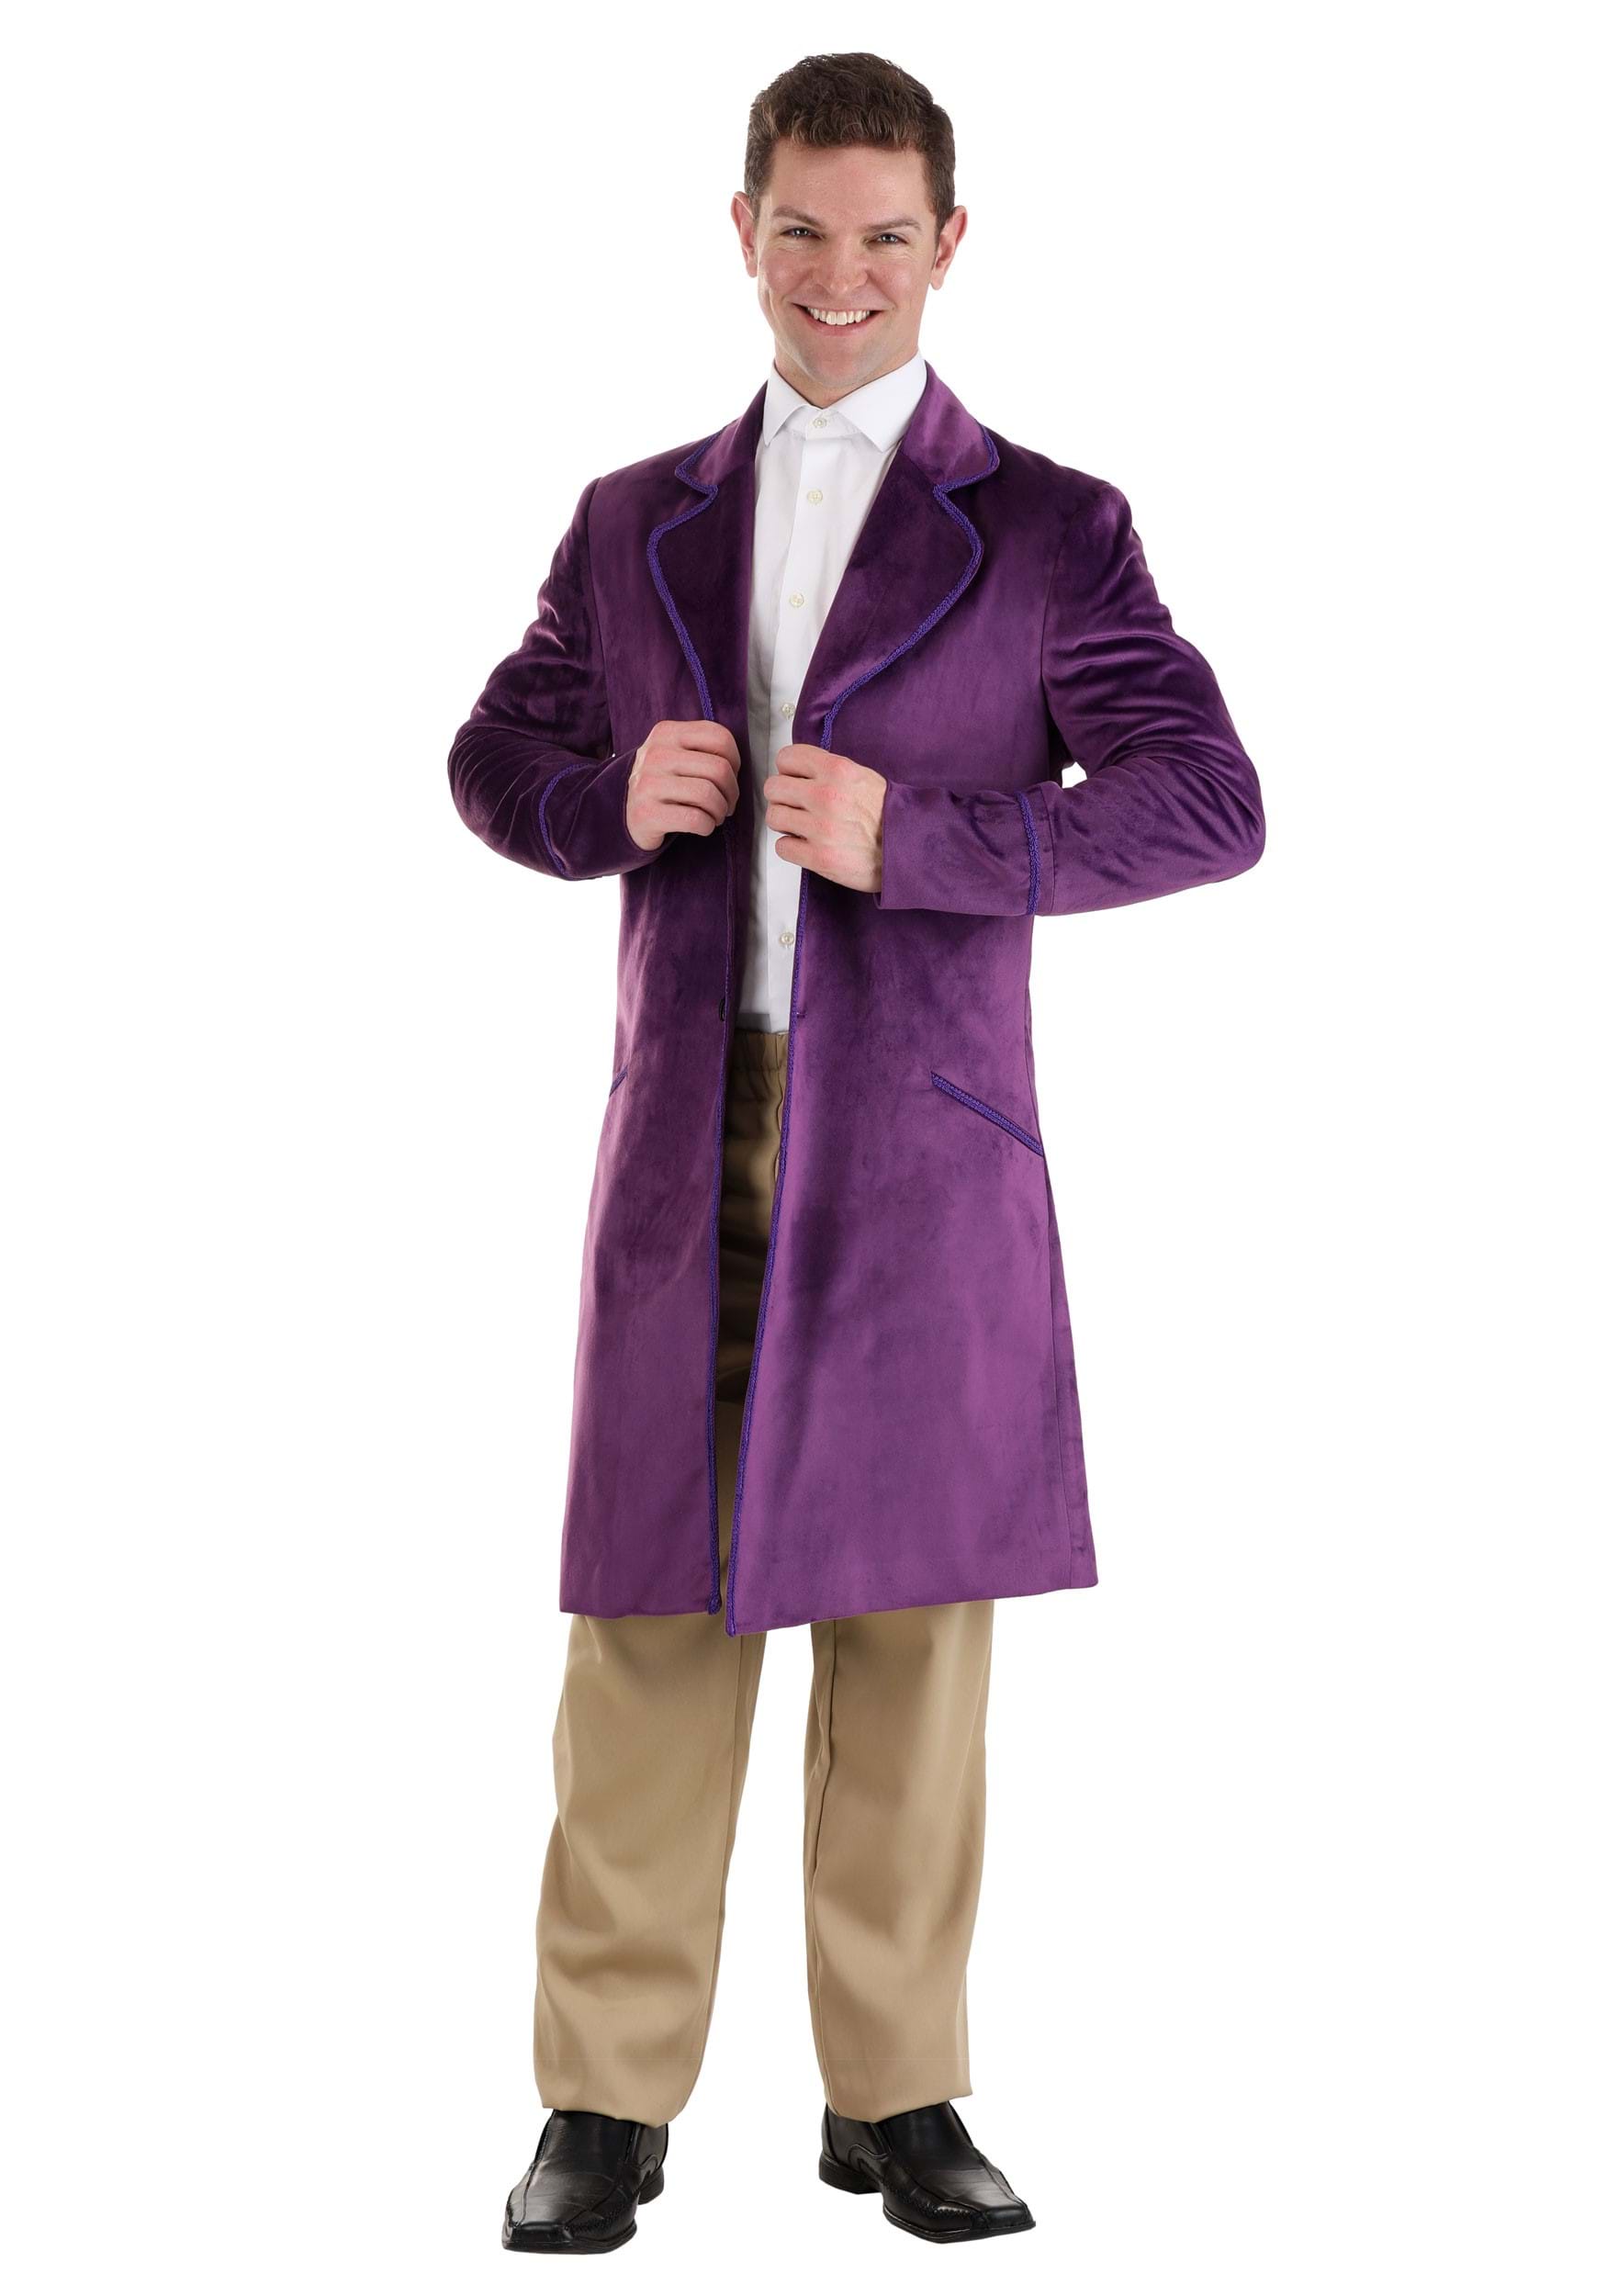 Photos - Fancy Dress FUN Costumes Authentic Willy Wonka Costume Jacket for Men | Willy Wonka Co